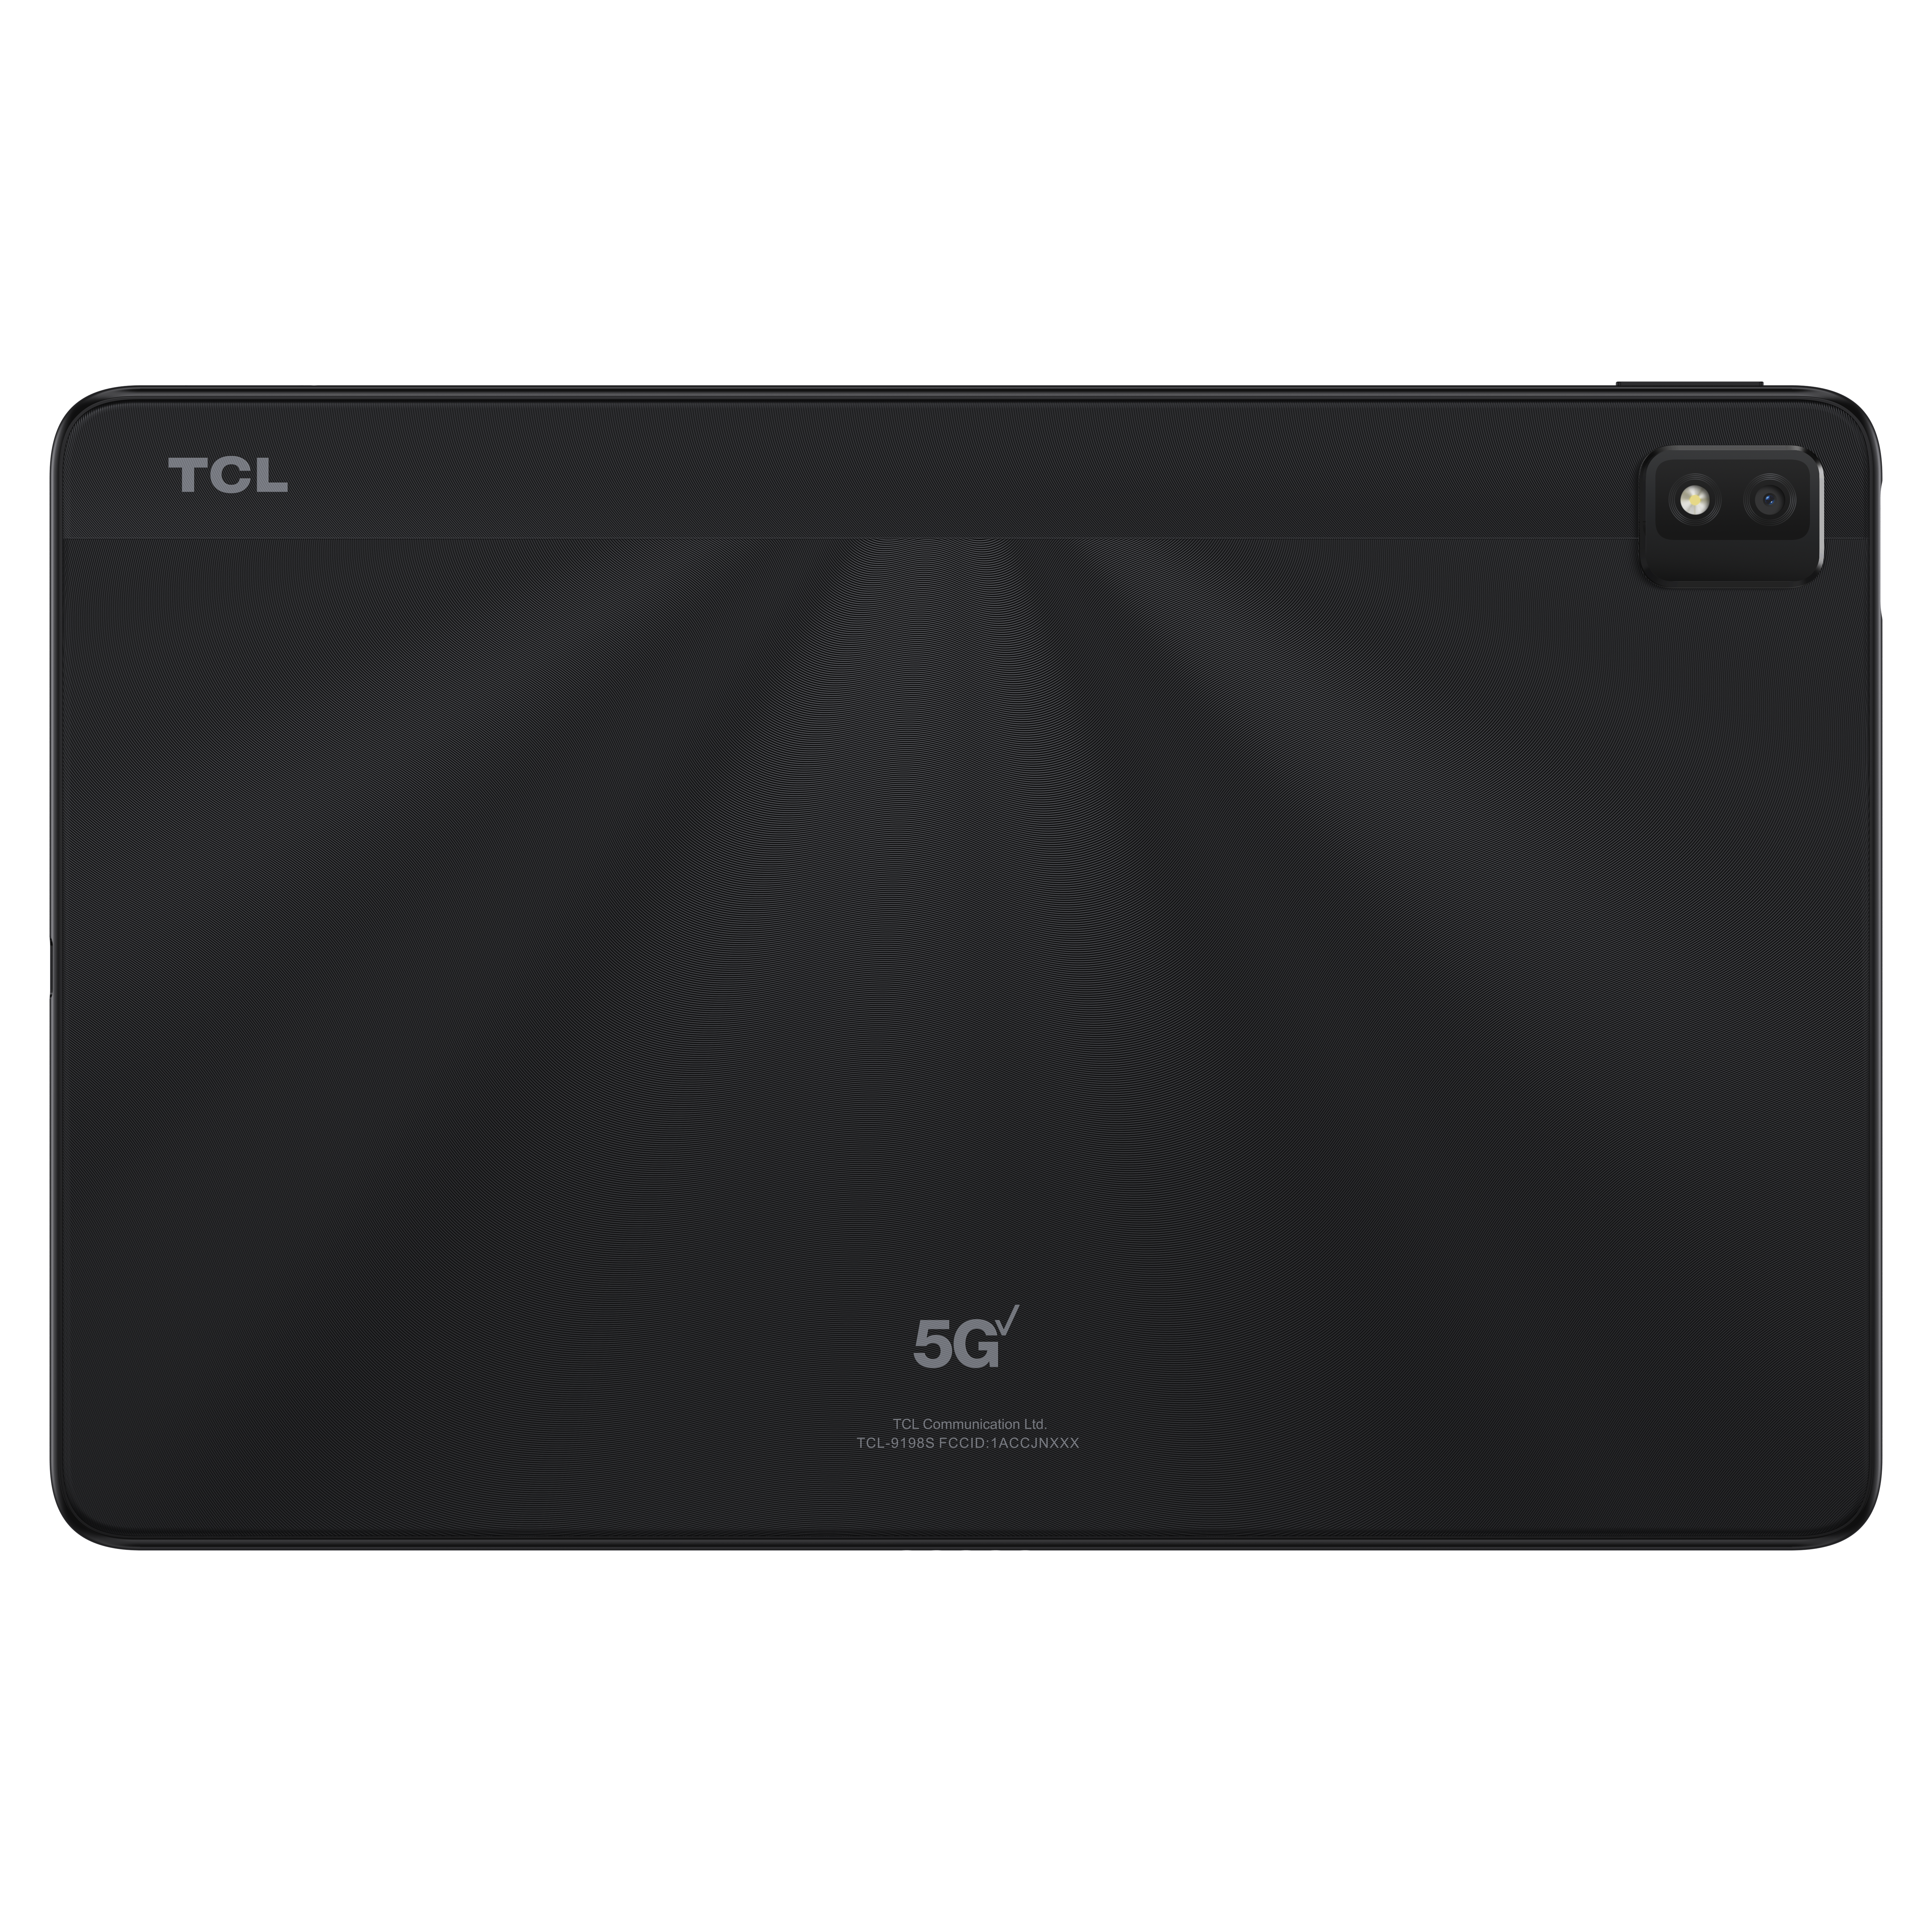 Product shot of the backside of the TCL TAB PRO 5G